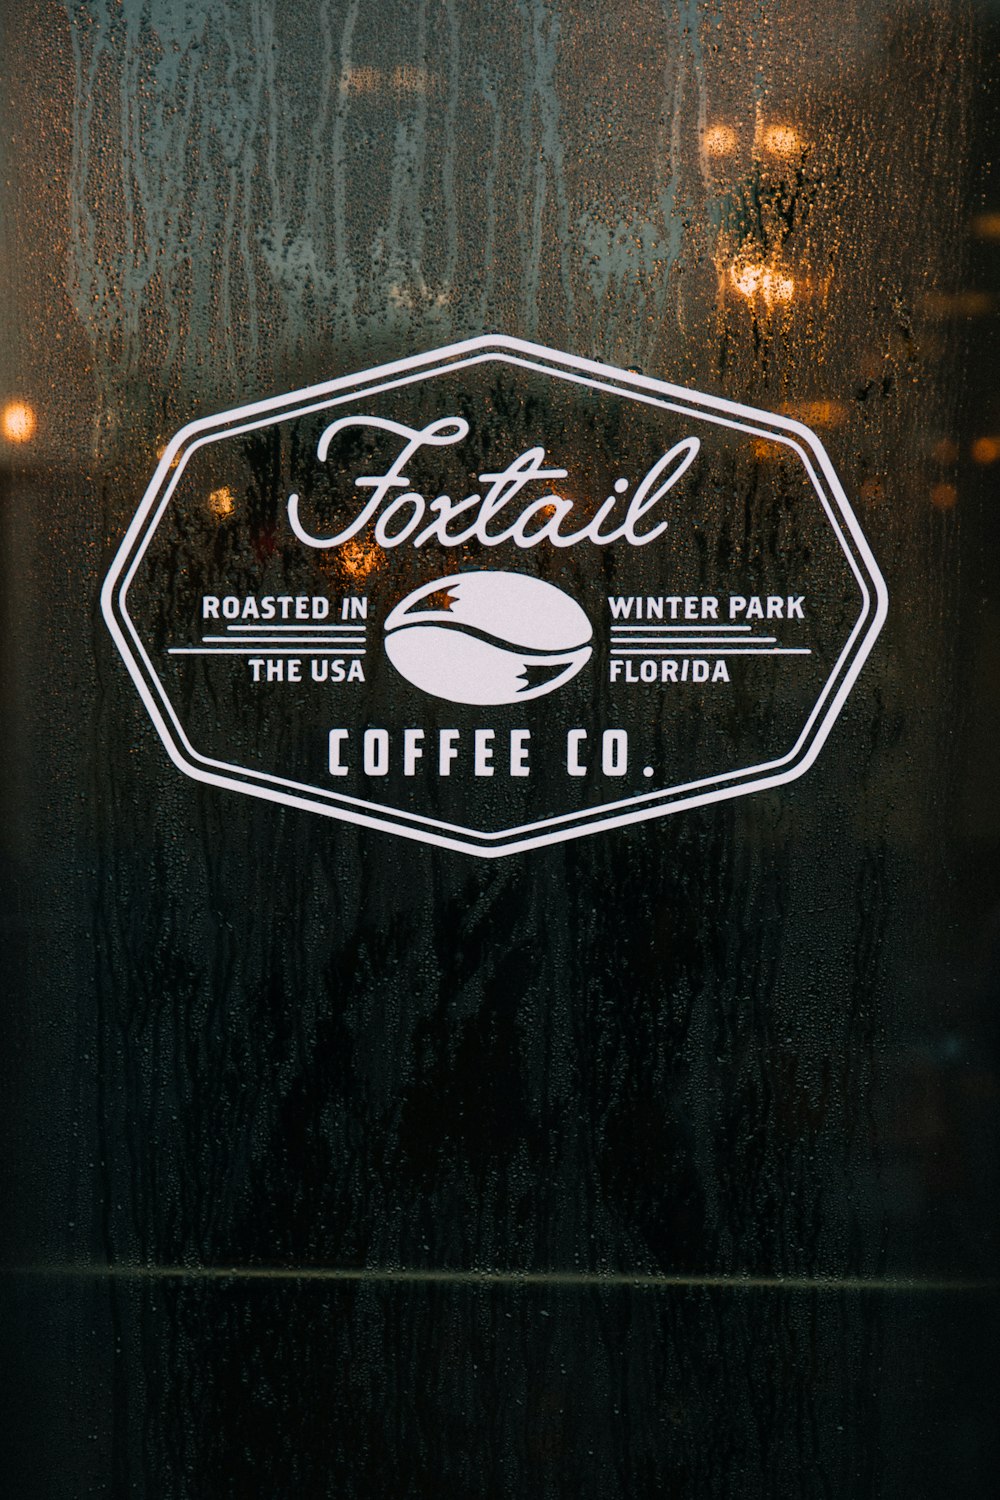 person showing Foxtail logo